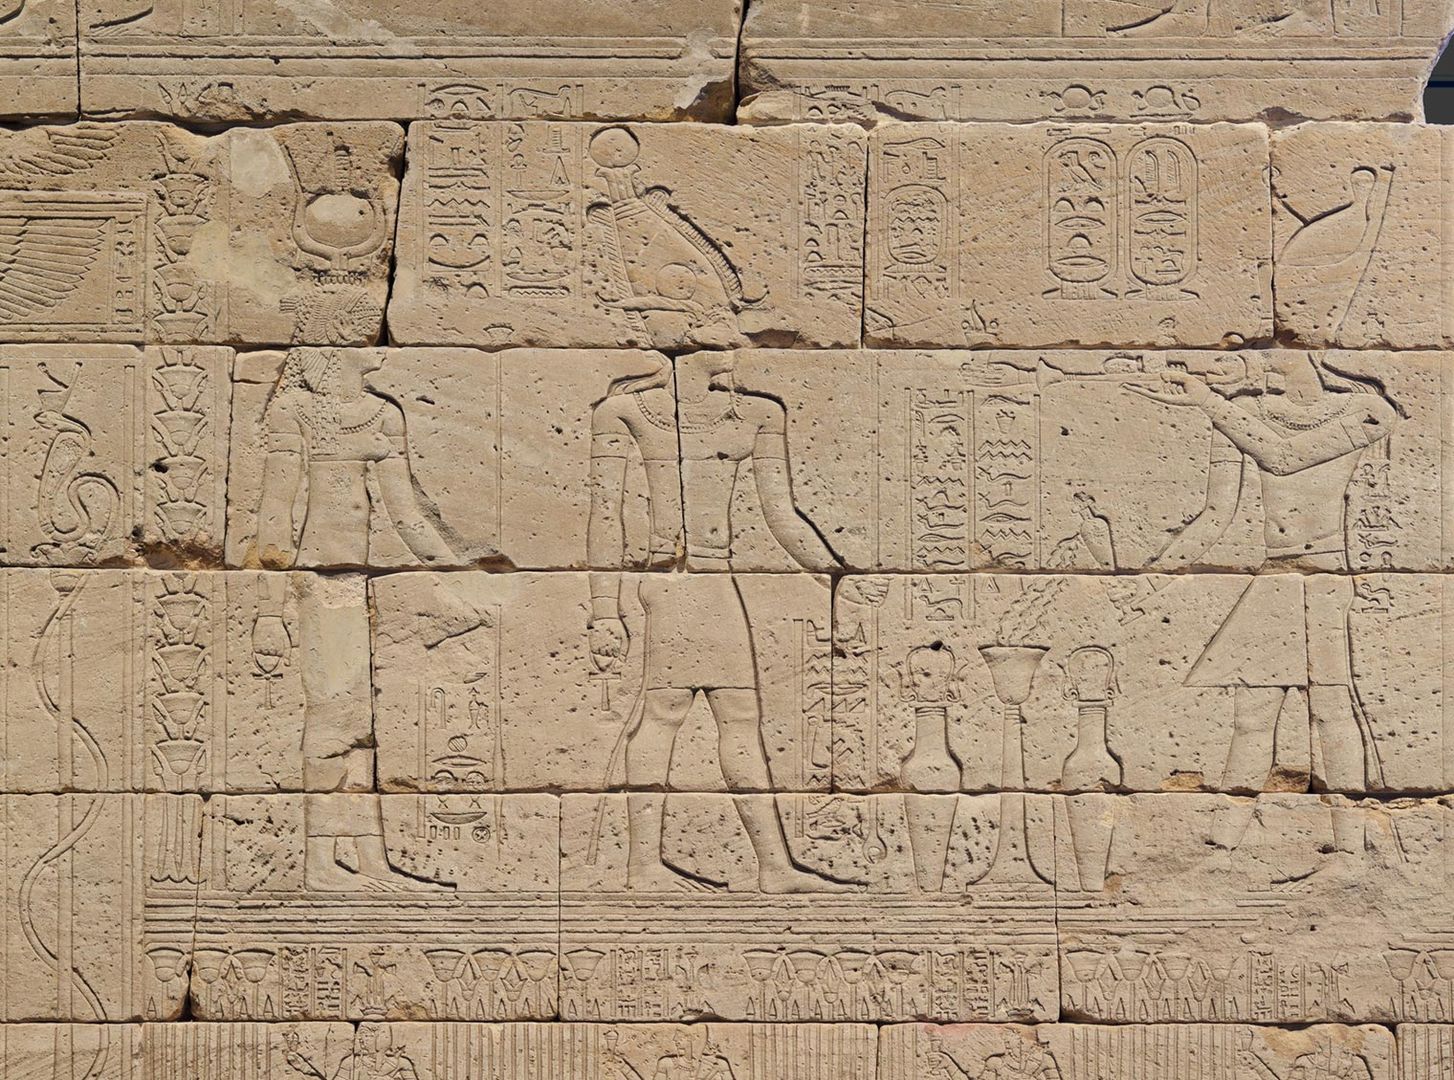 Detail of temple wall depicting Augustus (right) burning incense and pouring milk for the god Osiris (center) and the goddess Isis (left)